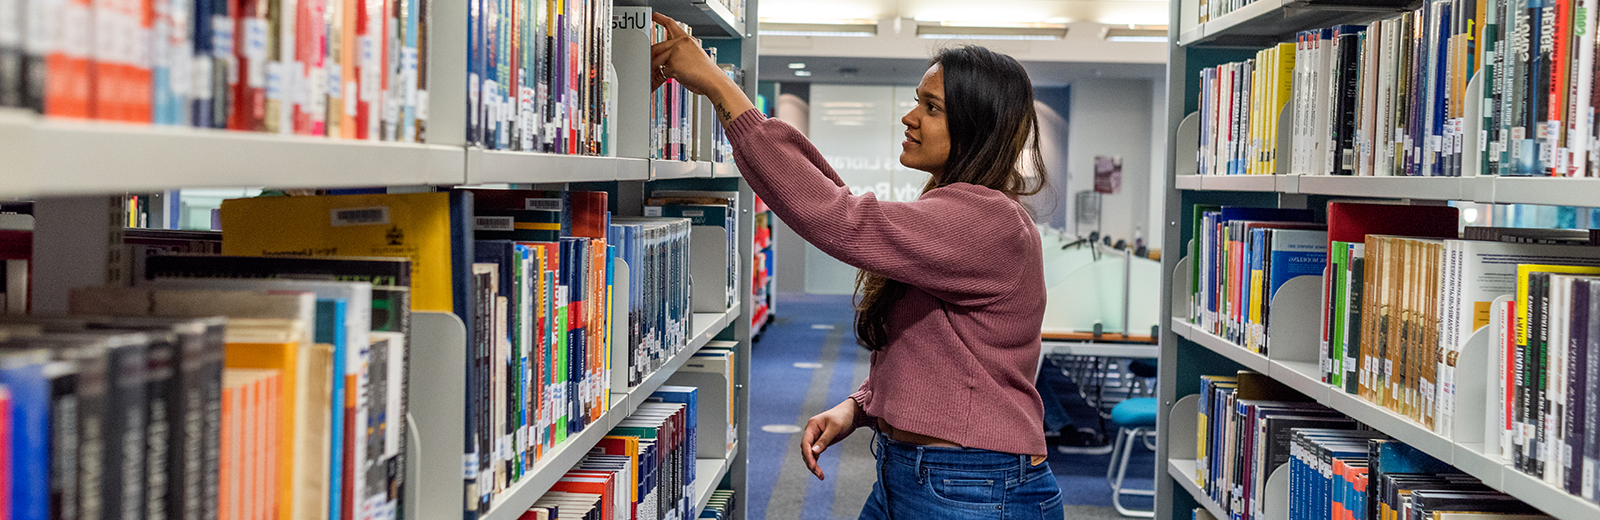 Female student placing a book back in the shelves in the library at Bayes 